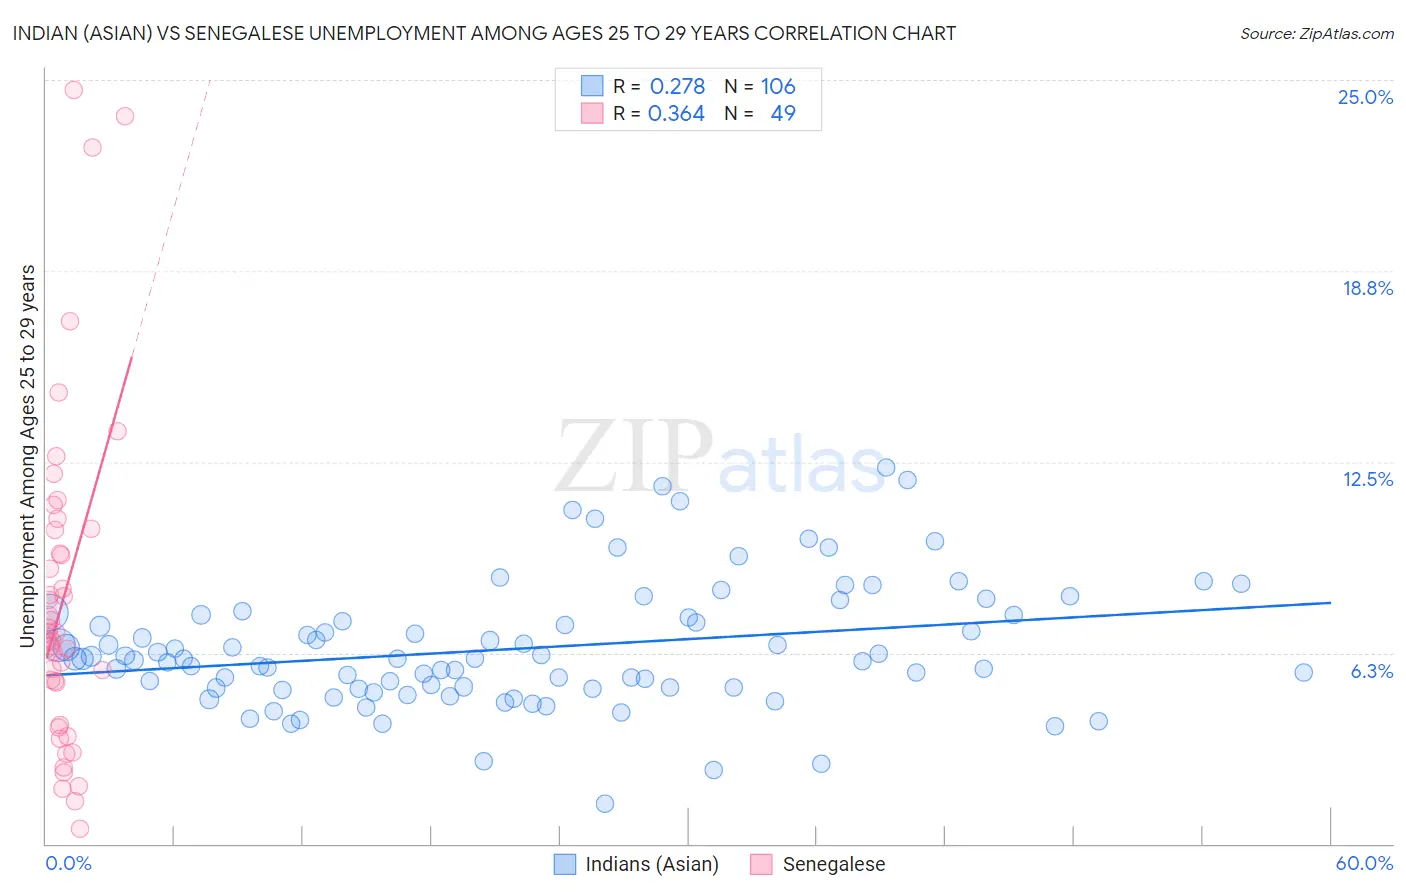 Indian (Asian) vs Senegalese Unemployment Among Ages 25 to 29 years